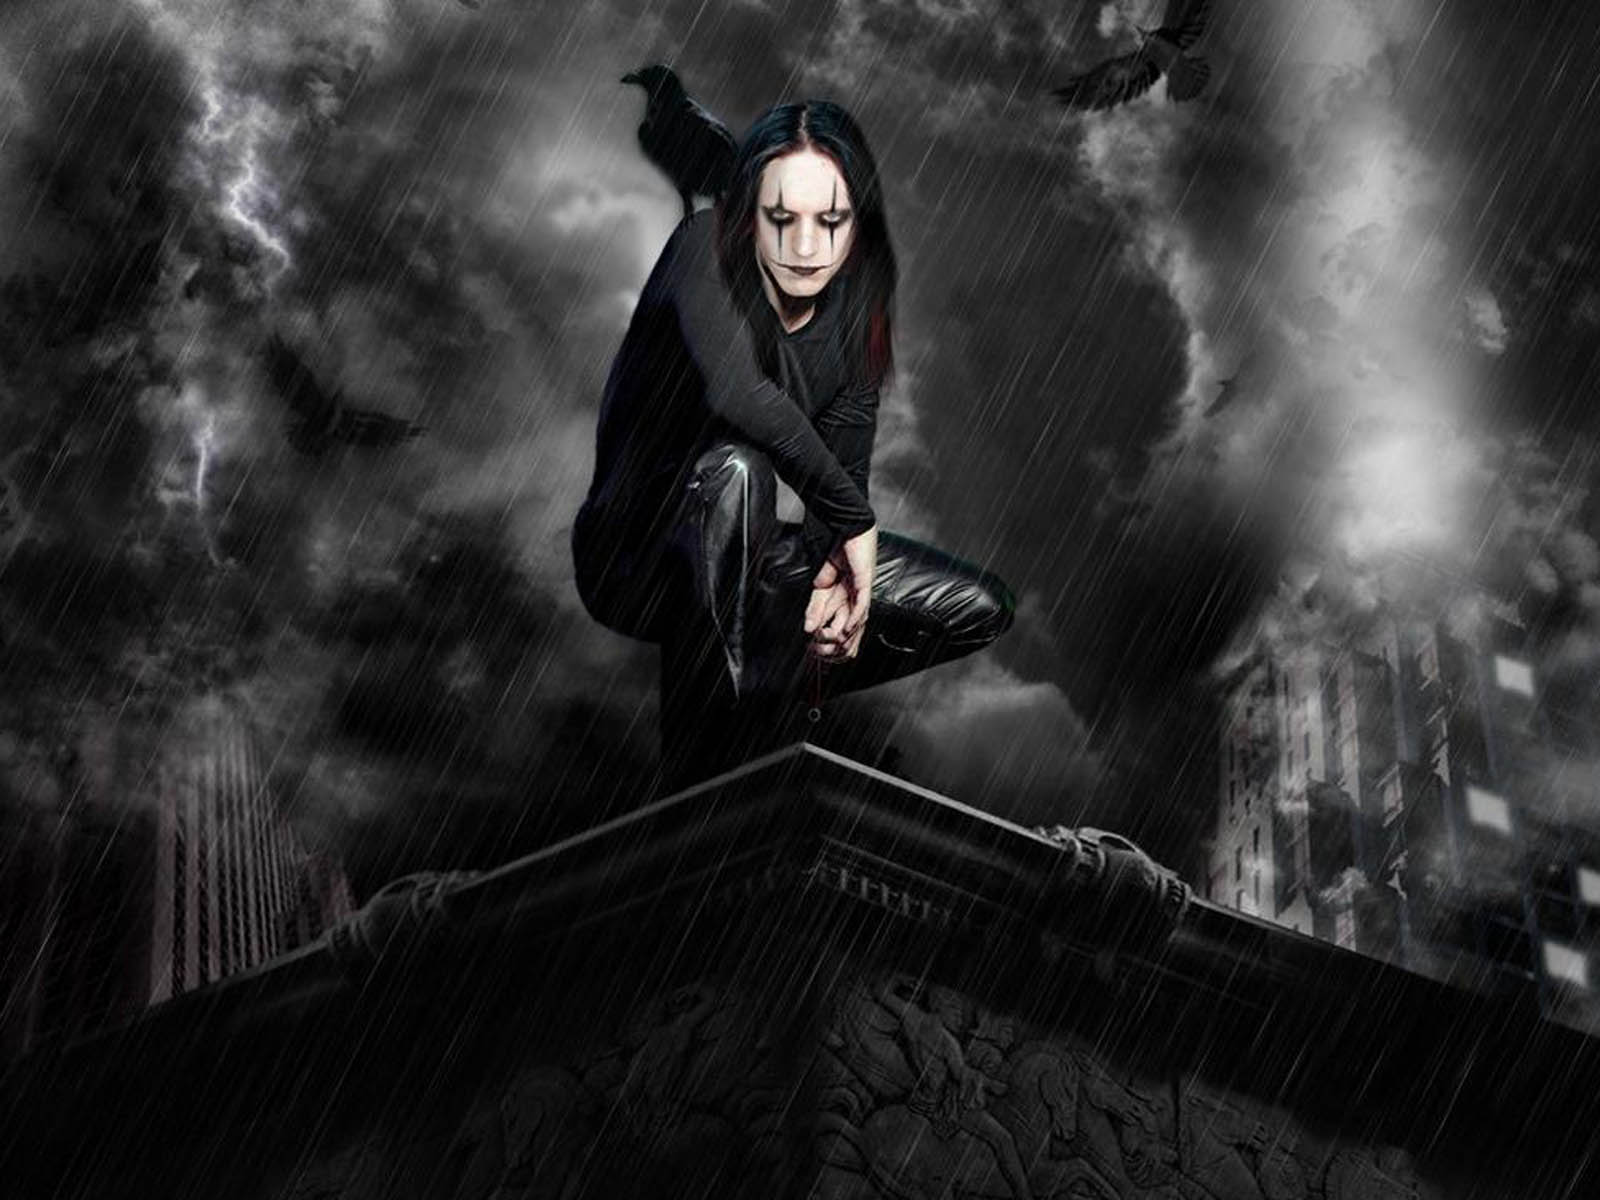 Gothic #154489 | Full HD Widescreen wallpapers for desktop download